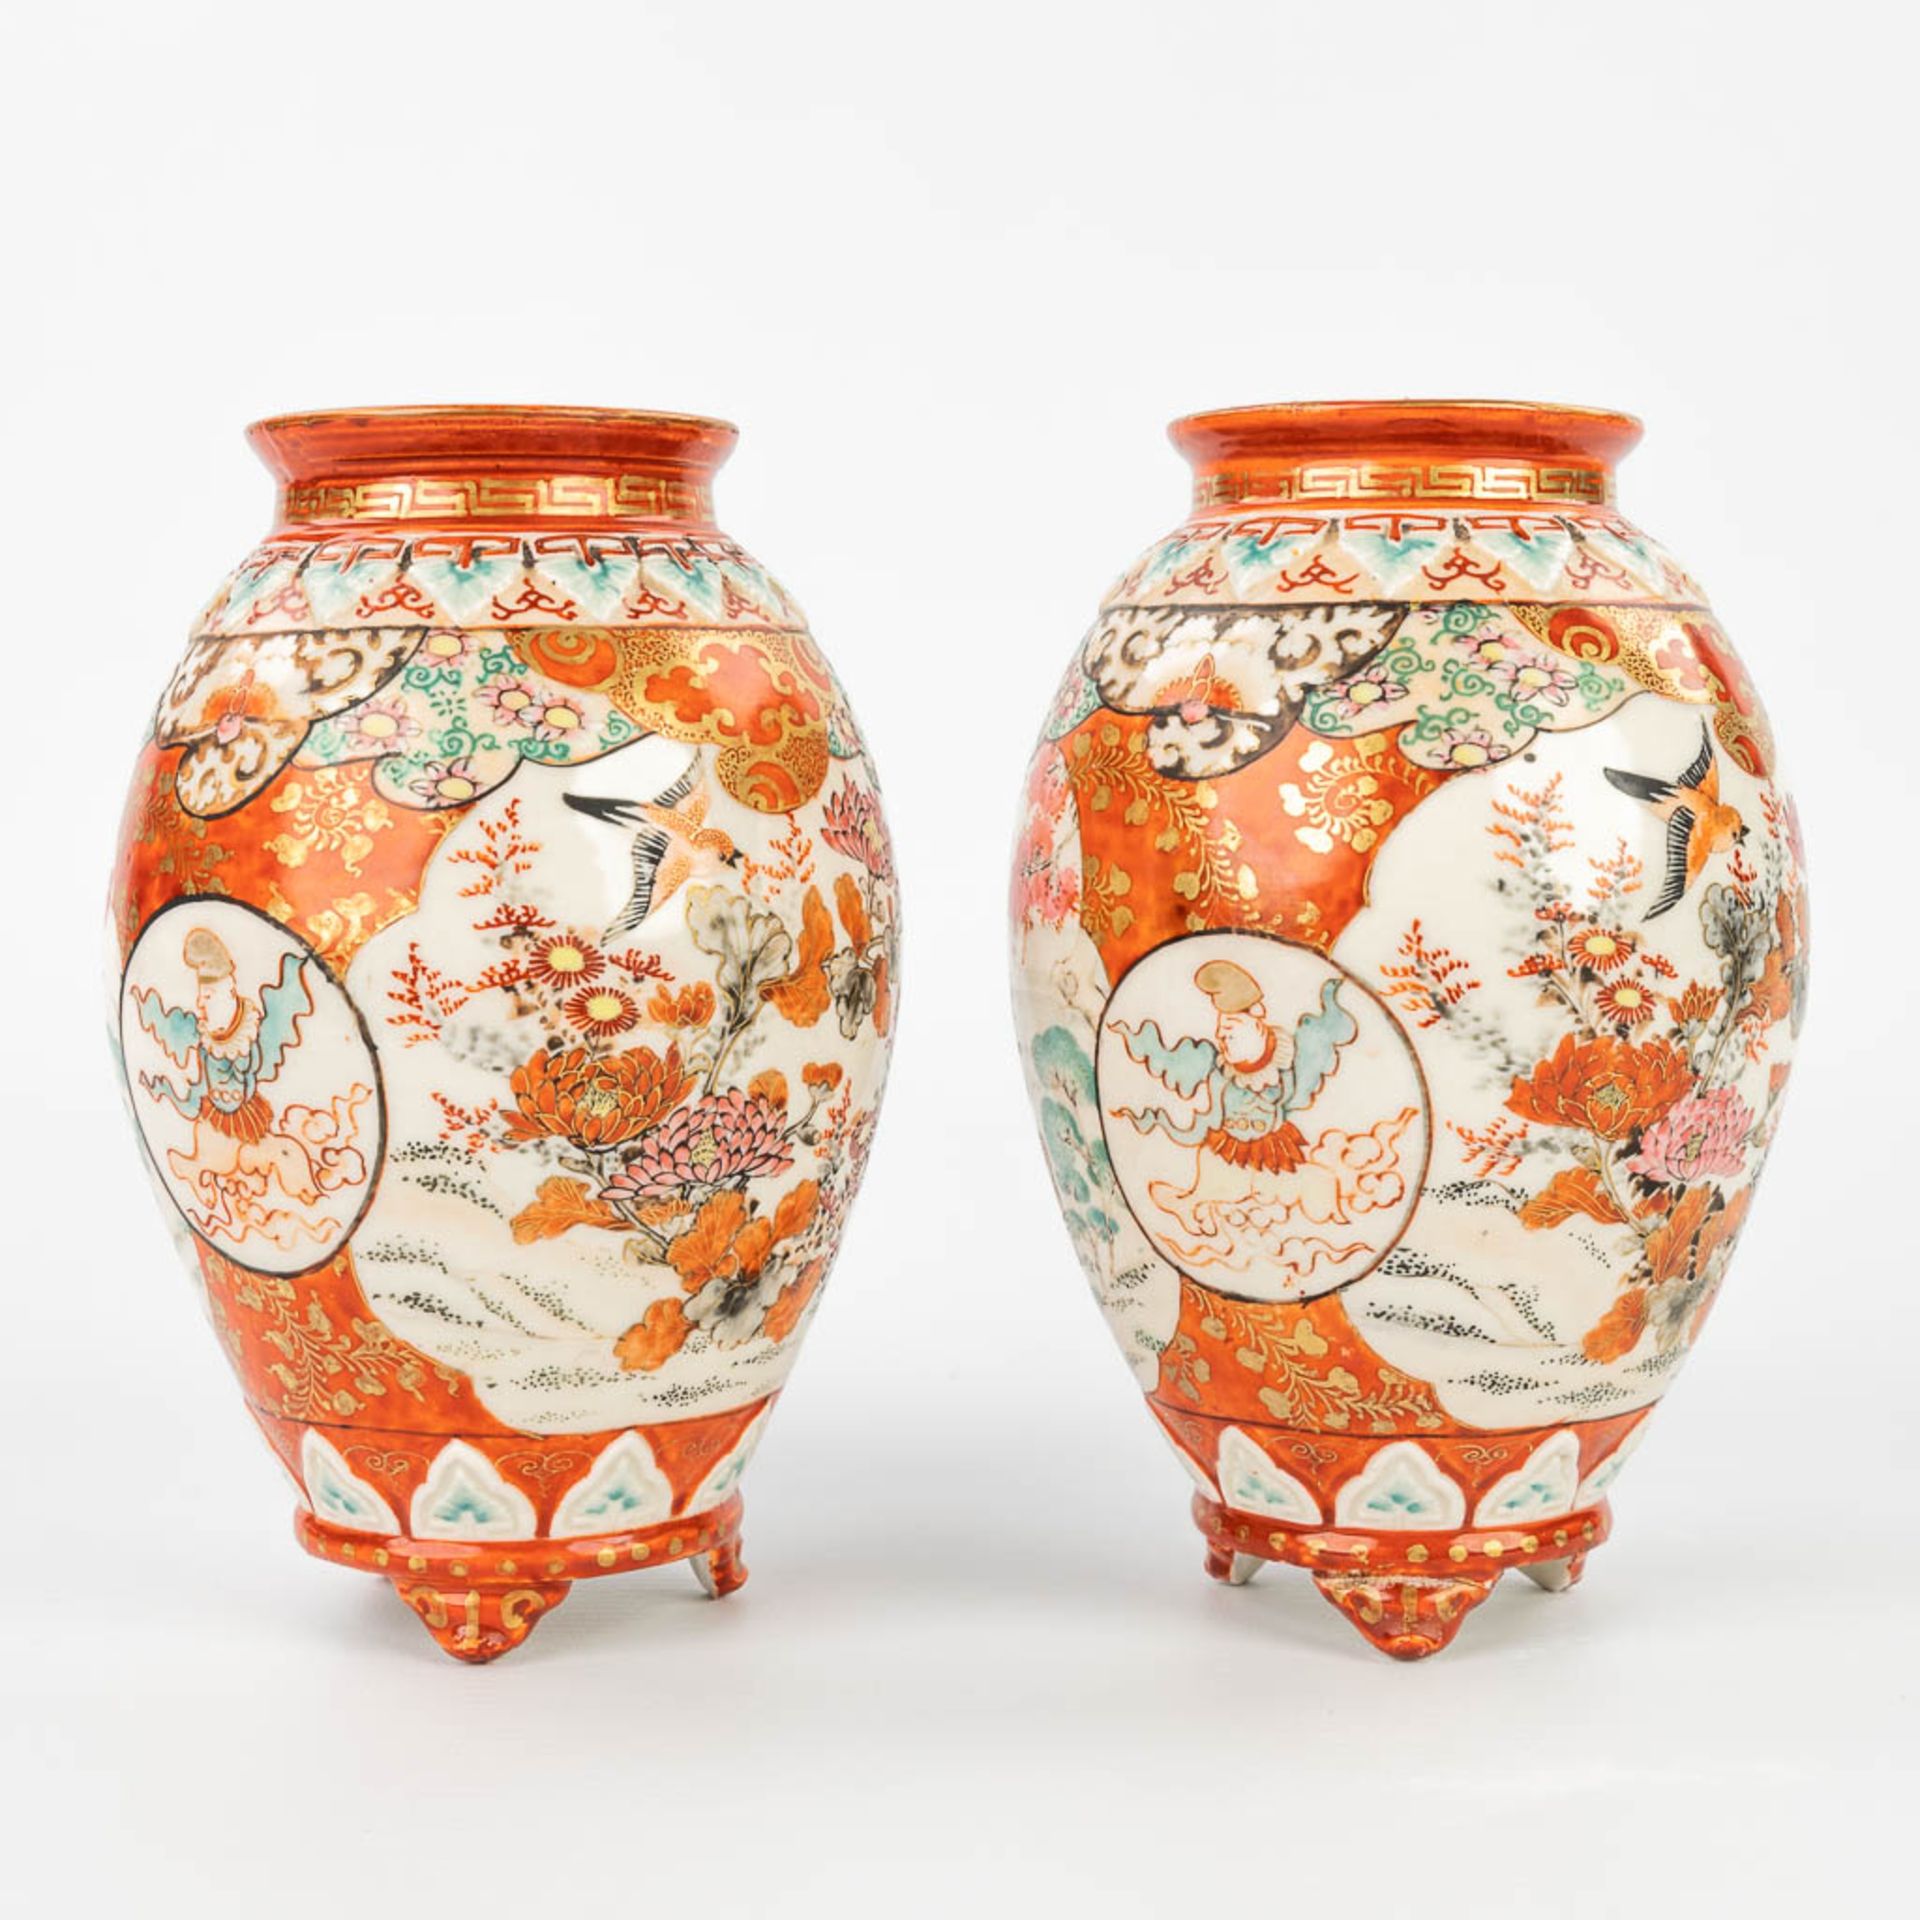 A pair of small vases made of stoneware with Kutani decor, made in Japan. (H:17cm) - Image 16 of 16